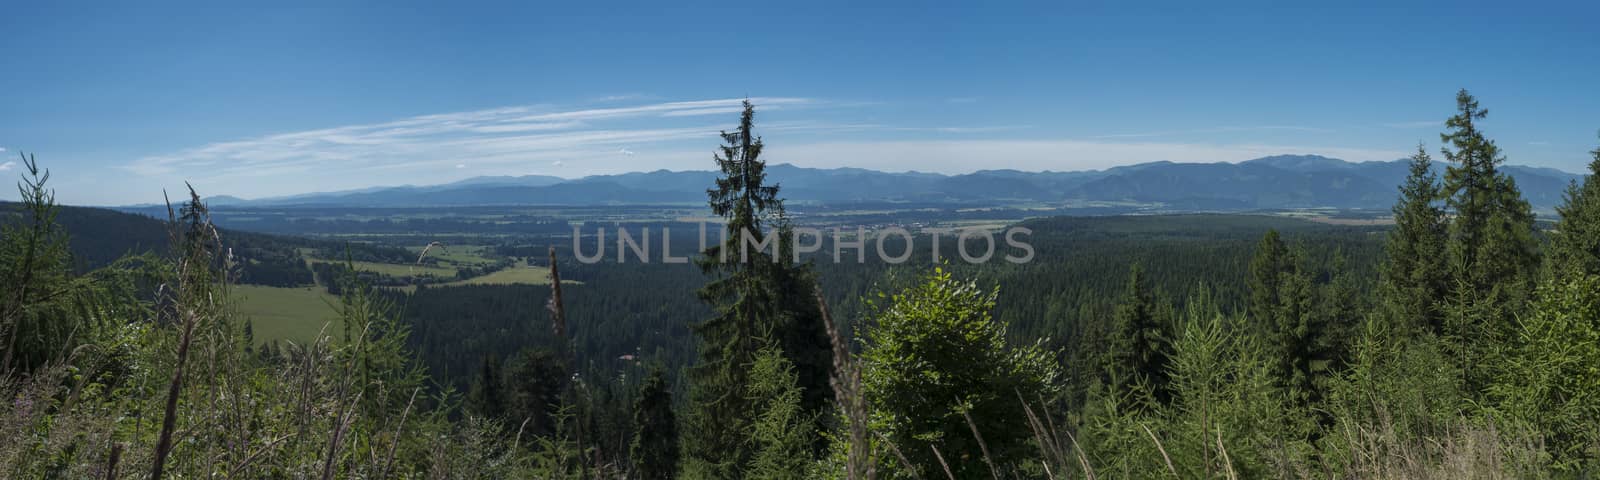 View from tatra mountain trail on Baranec to valley with low tatra and blue misty slopes of hills in the distance. Pine trees and coniferous forest hills, blue sky. Tatra mountain in summer, Slovakia. by Henkeova